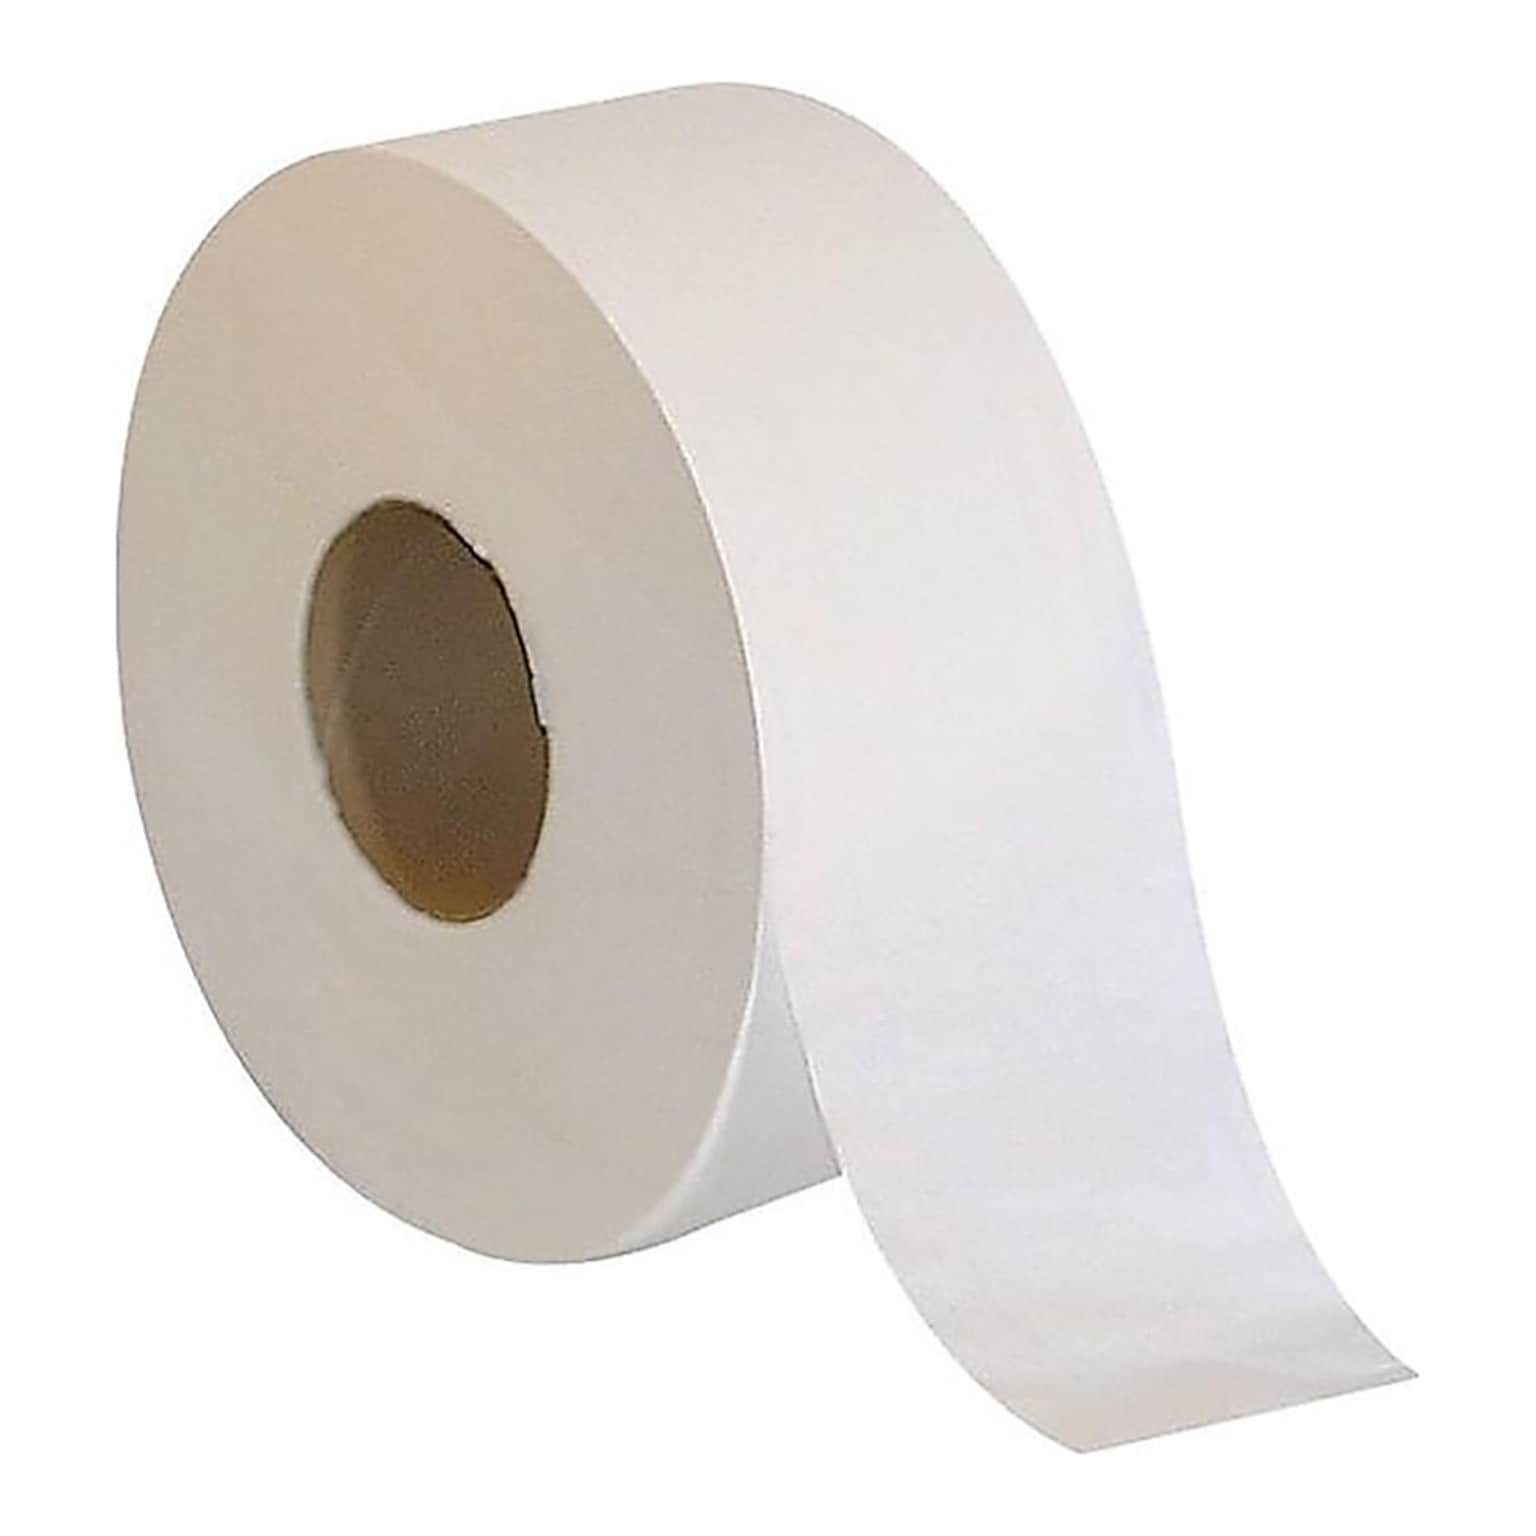 Coastwide Professional™ Recycled 2-ply Jumbo Toilet Paper, White, 1000 ft./Roll, 6 Rolls/Case (CW20190)